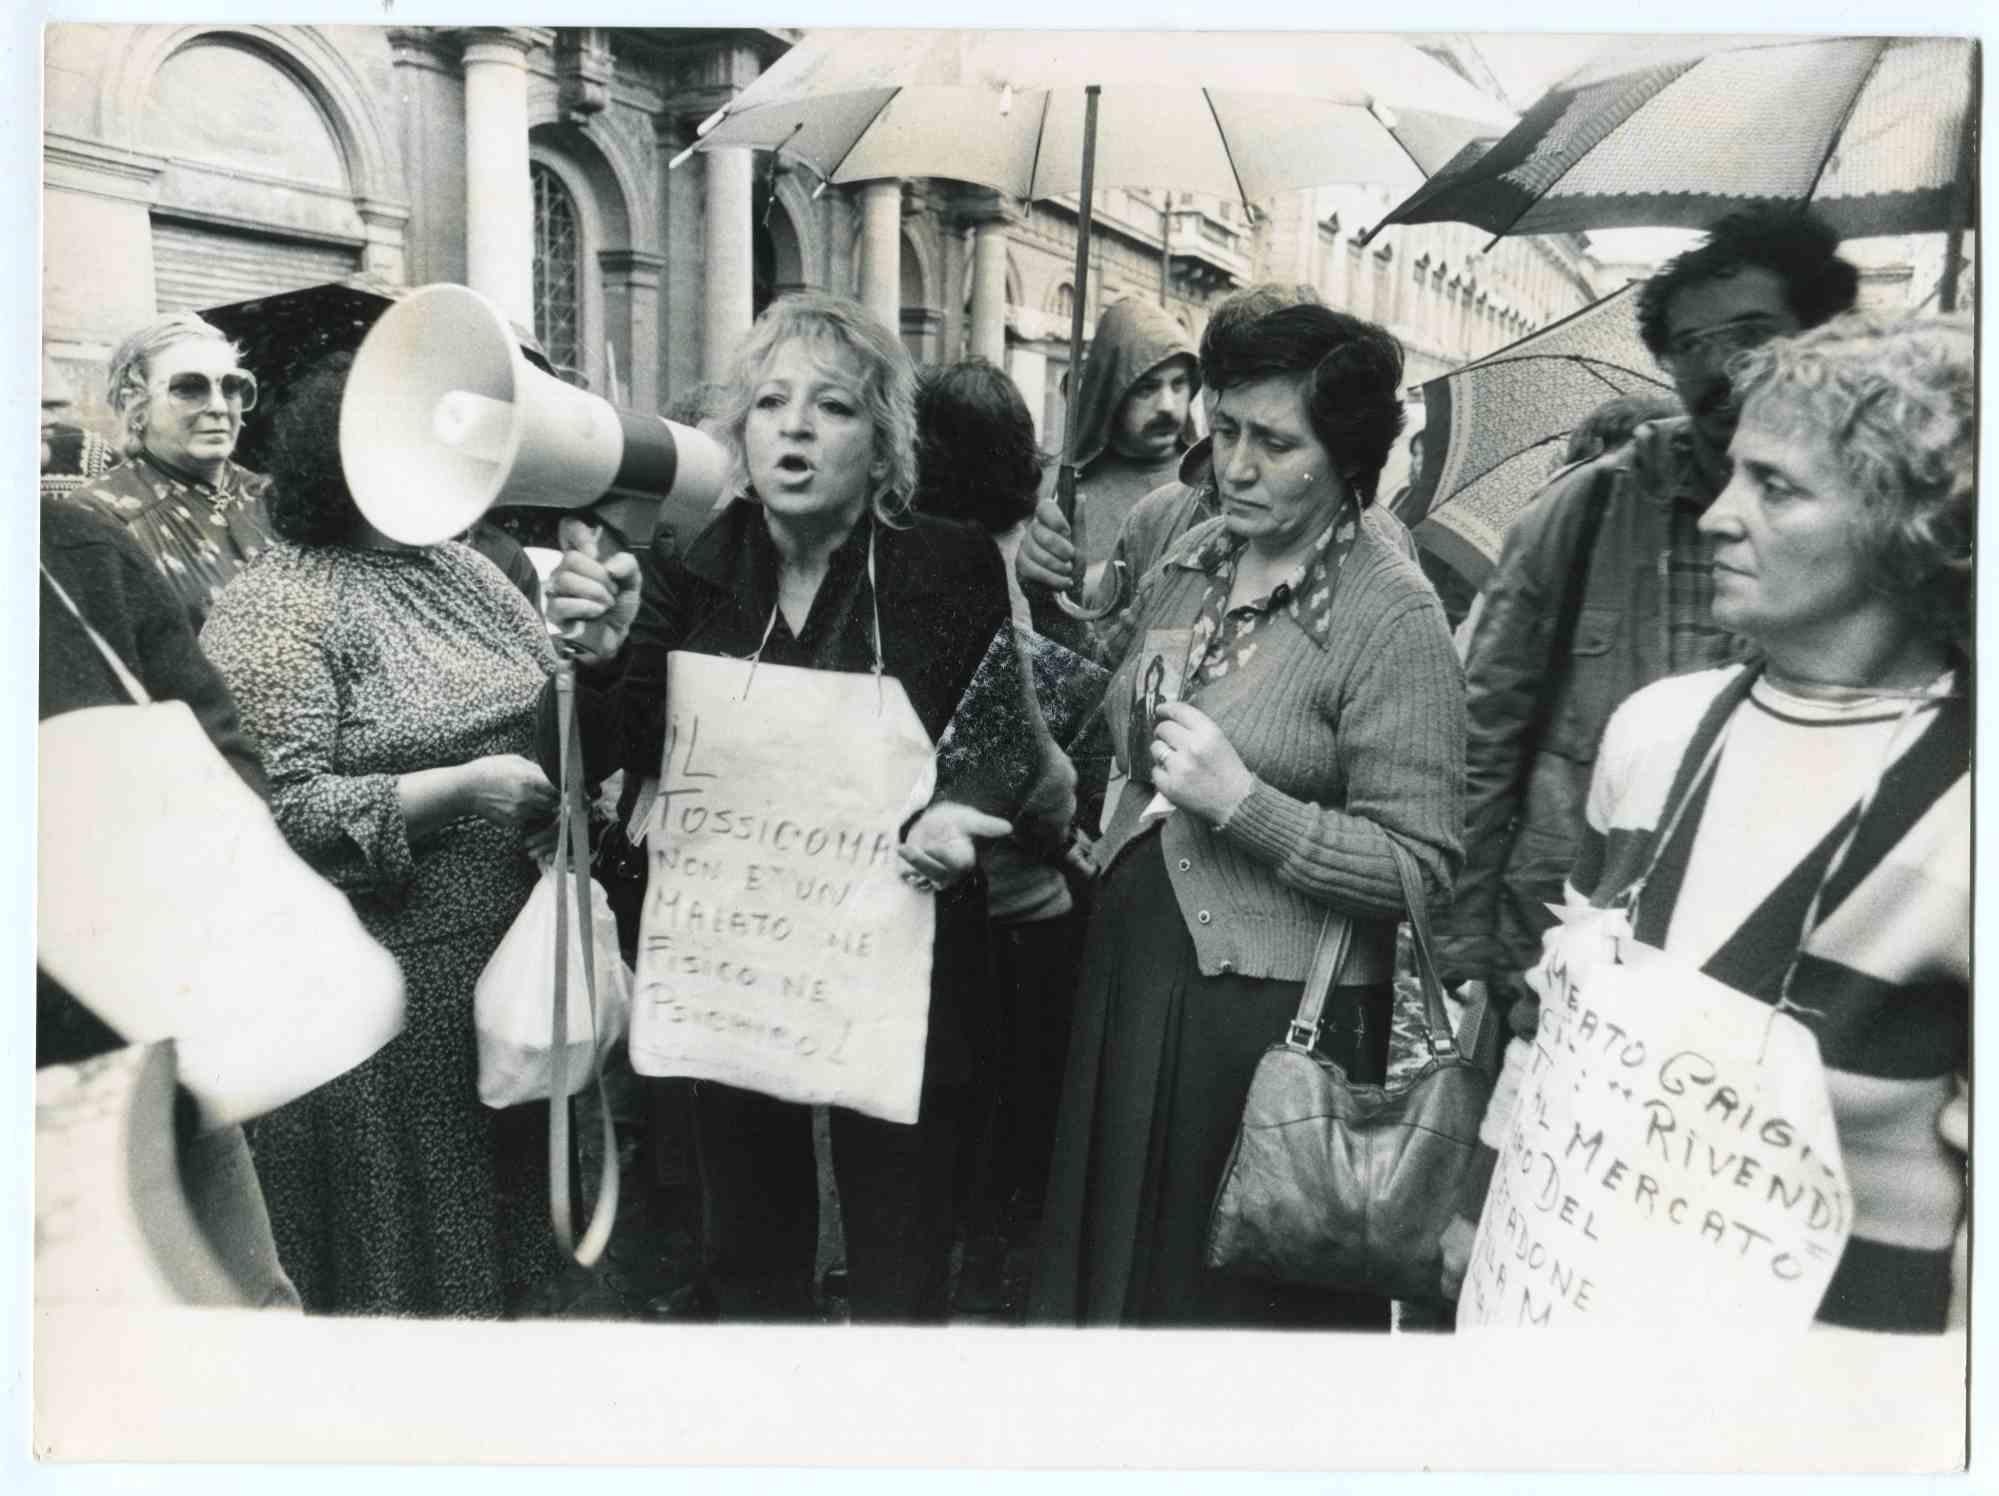 The Protest - Historical Photograph About the Feminist Movement - 1980